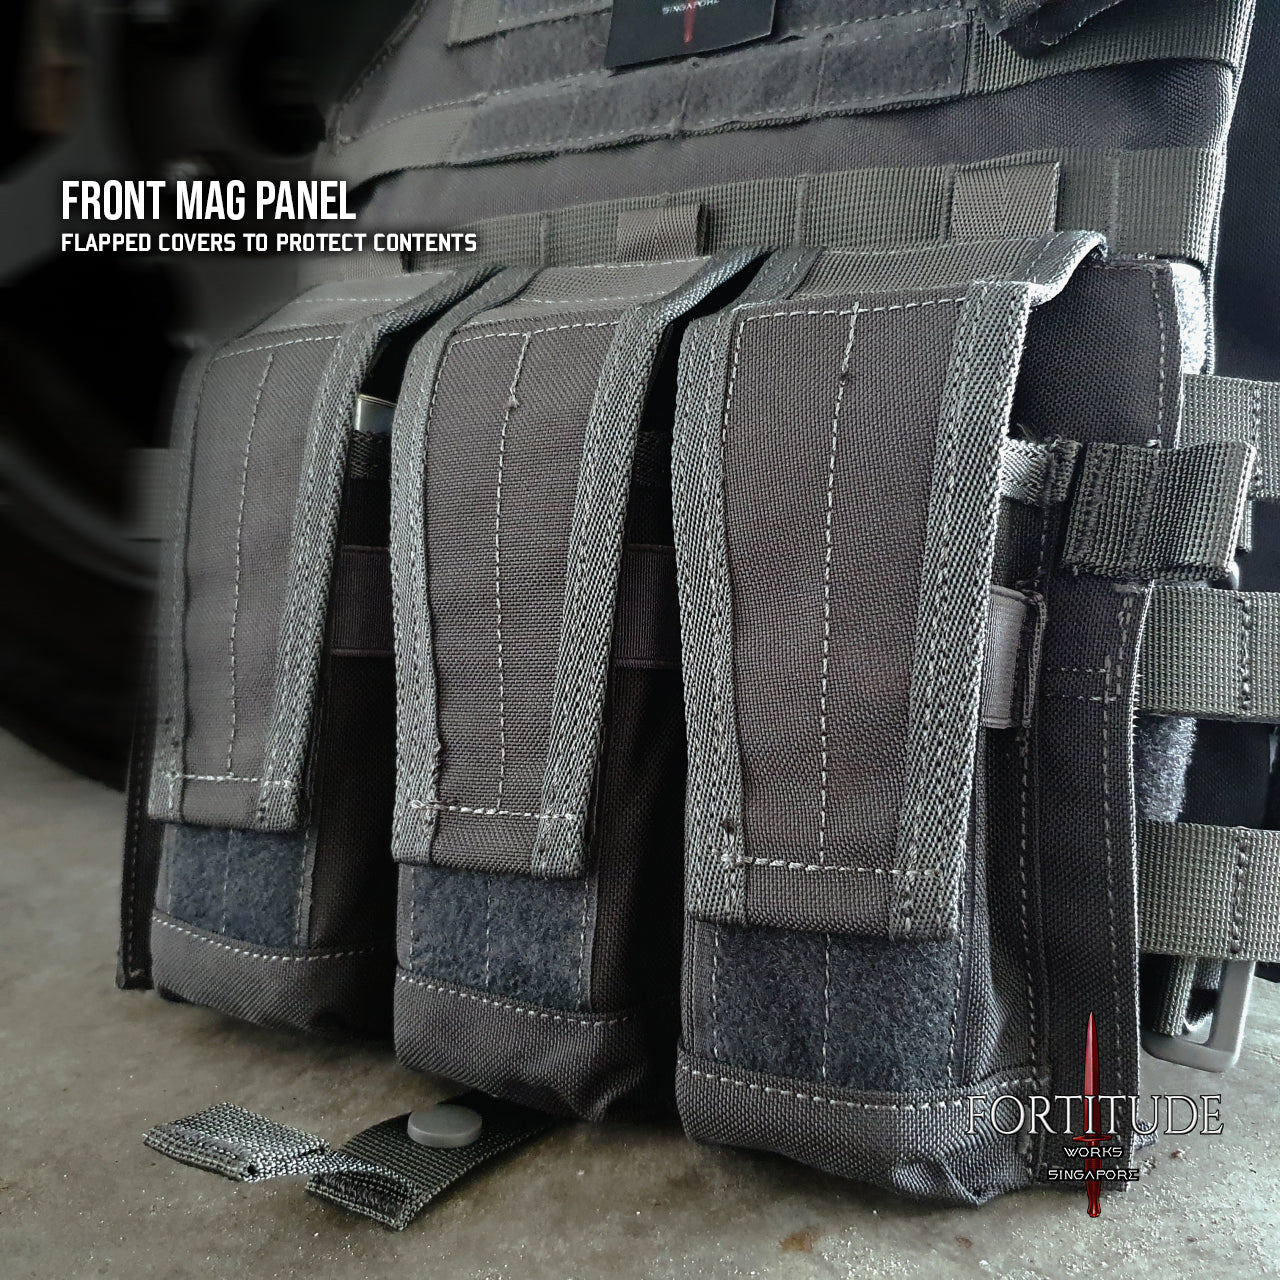 MINIMALIST MKII EXTENDED MISSIONS PACK (MULTICAM) - FORTITUDE WORKS SINGAPORE